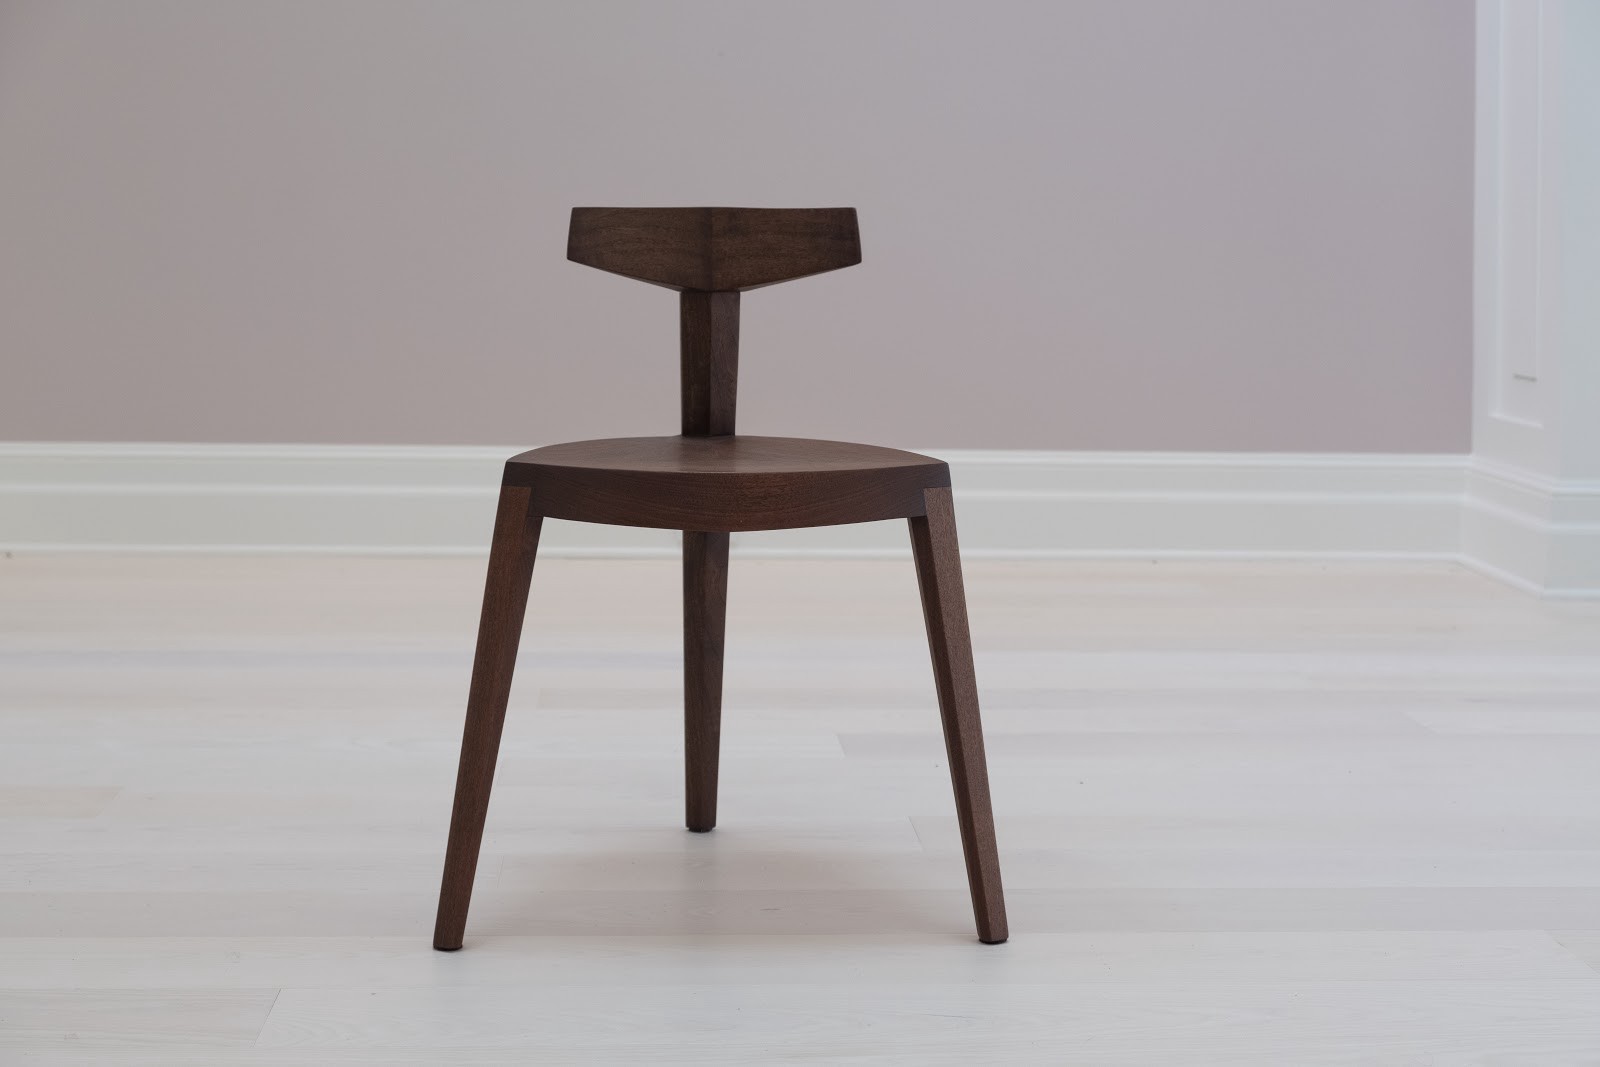 Brown wooden chair with 3 angular legs and a short back made from a vertical rectangular pole with a crossbar at the top.